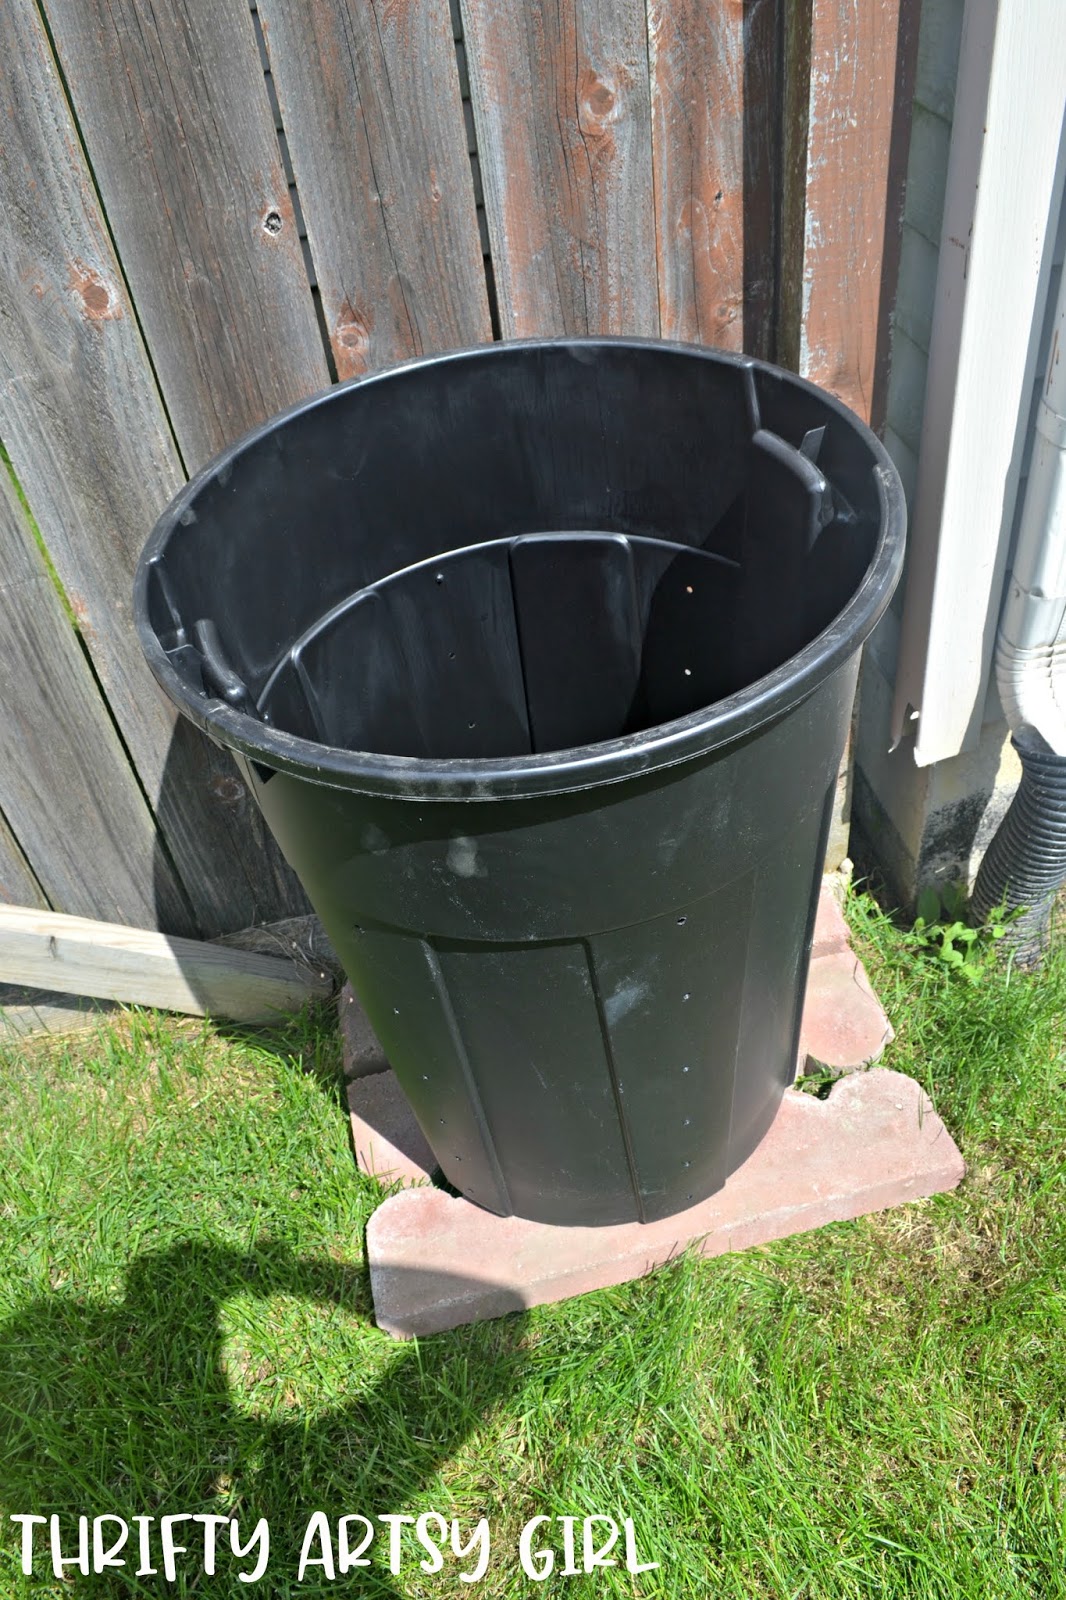 How to Build and Use a Trash Can Composter